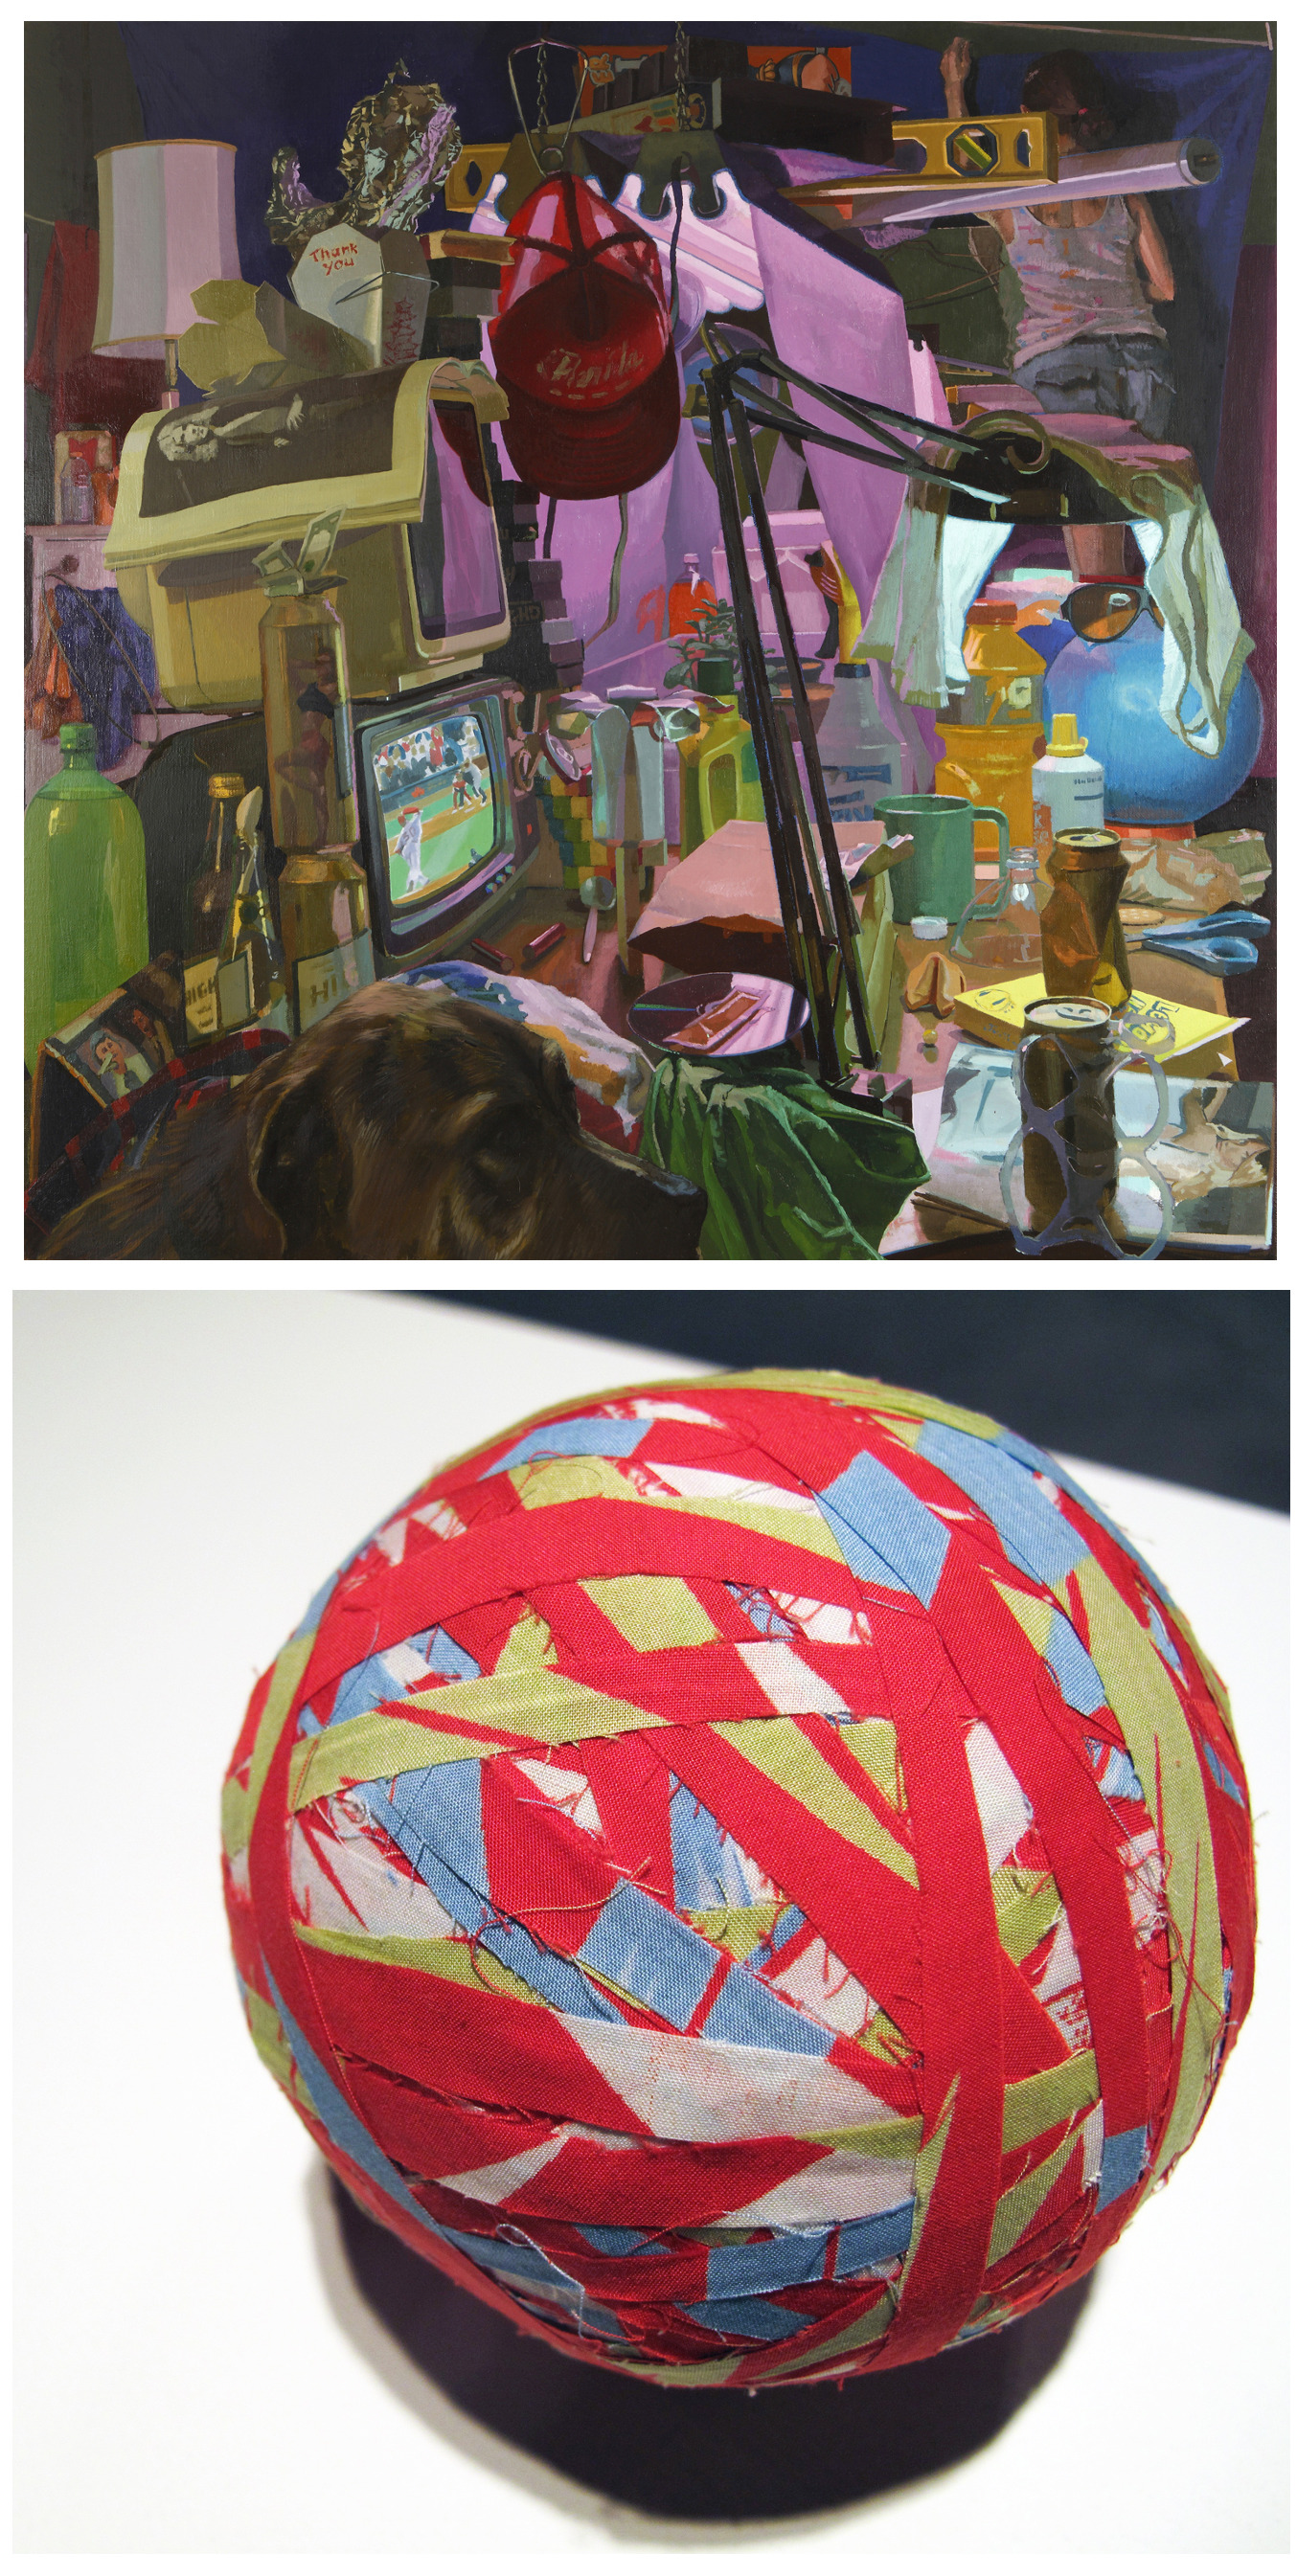 Neil Callander's "Dusty's Table" and Adrienne Callander's "Dad's Hawaiian Shirt" are among works featured in the Mississippi Museum of Art's 2014 Mississippi Invitational Exhibition.